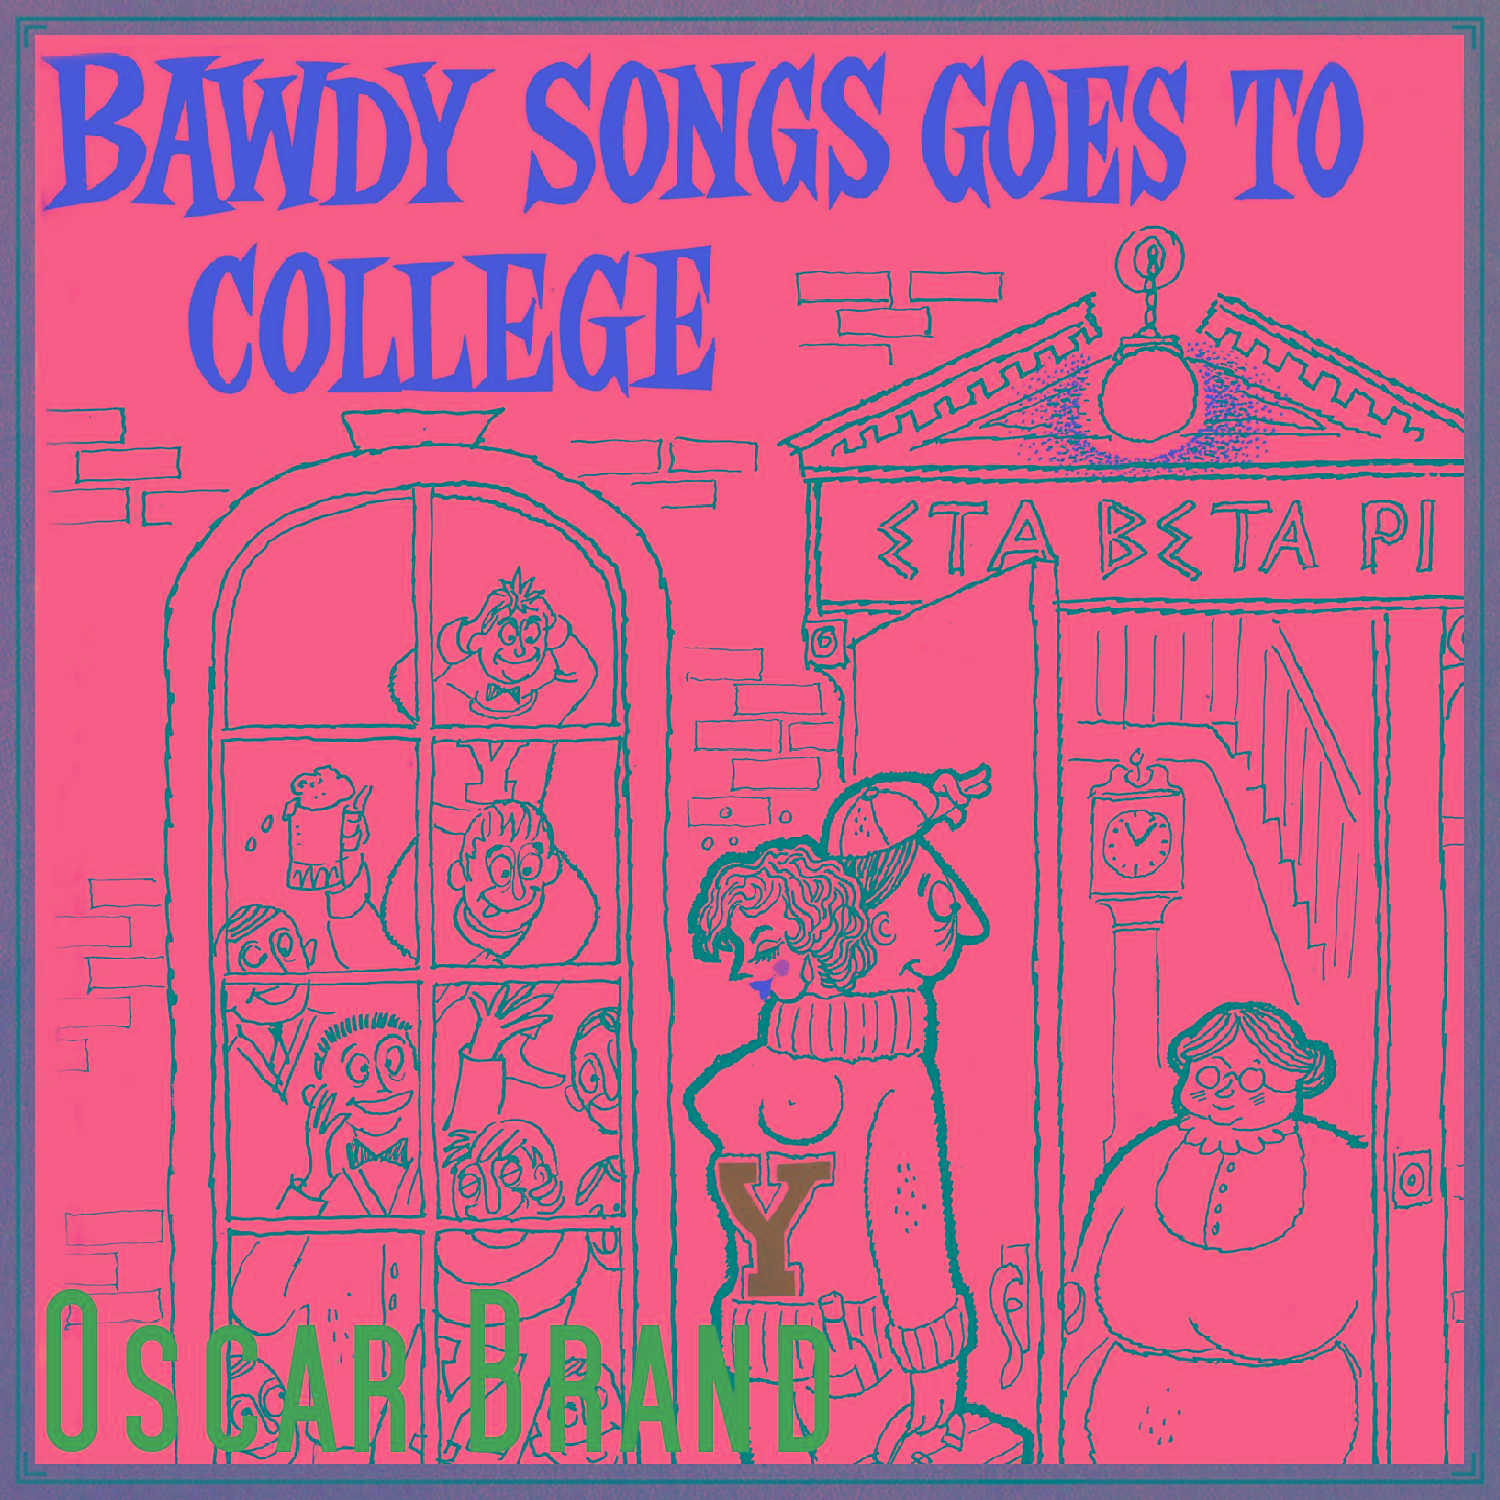 Bawdy Songs Goes to College